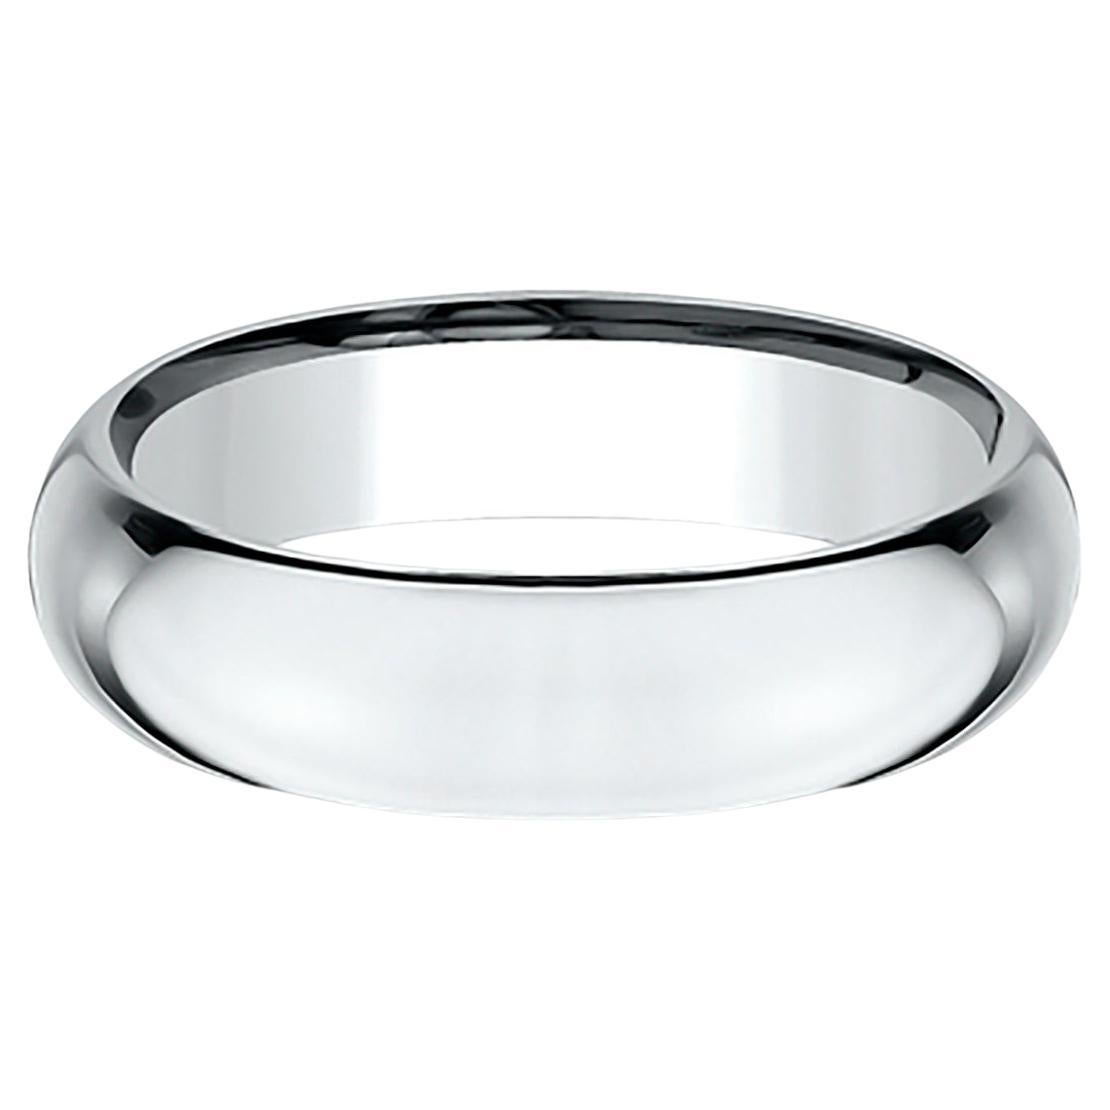 Benchmark Classic Comfort Fit Wedding Band in 14K White Gold, Width 6mm